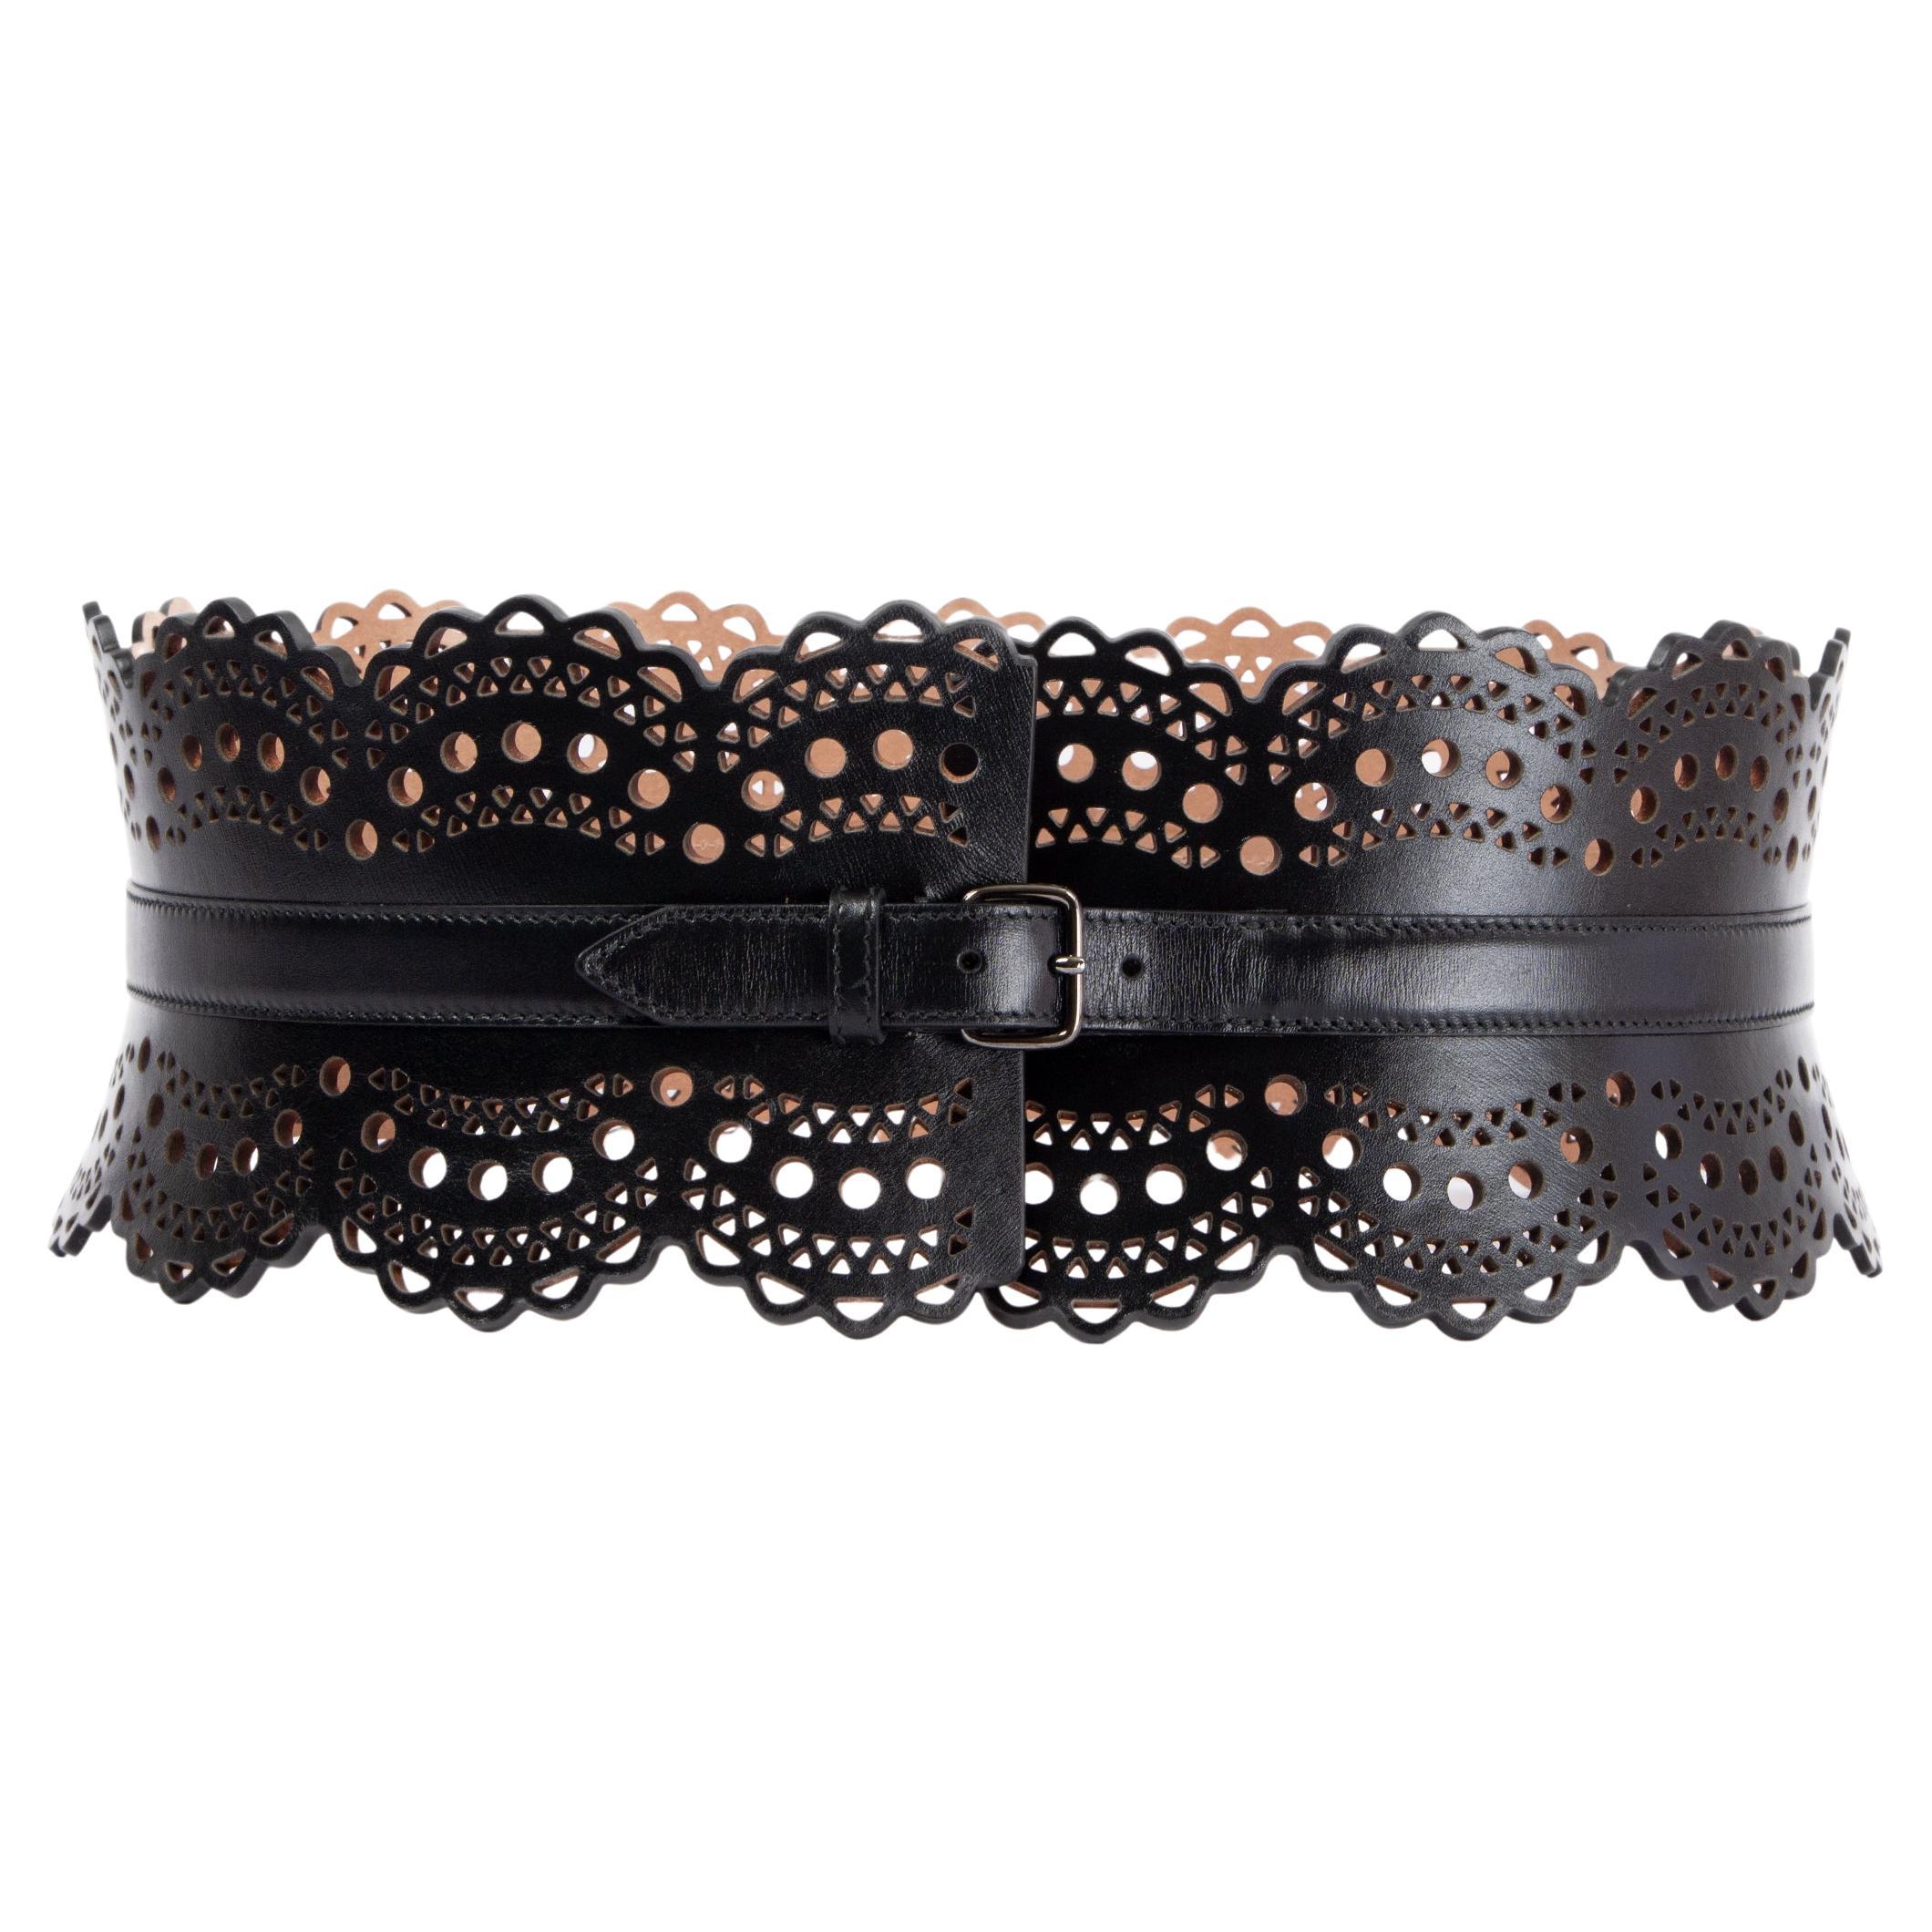 ALAIA black leather PERFORATED WIDE WAIST CORSET Belt 85